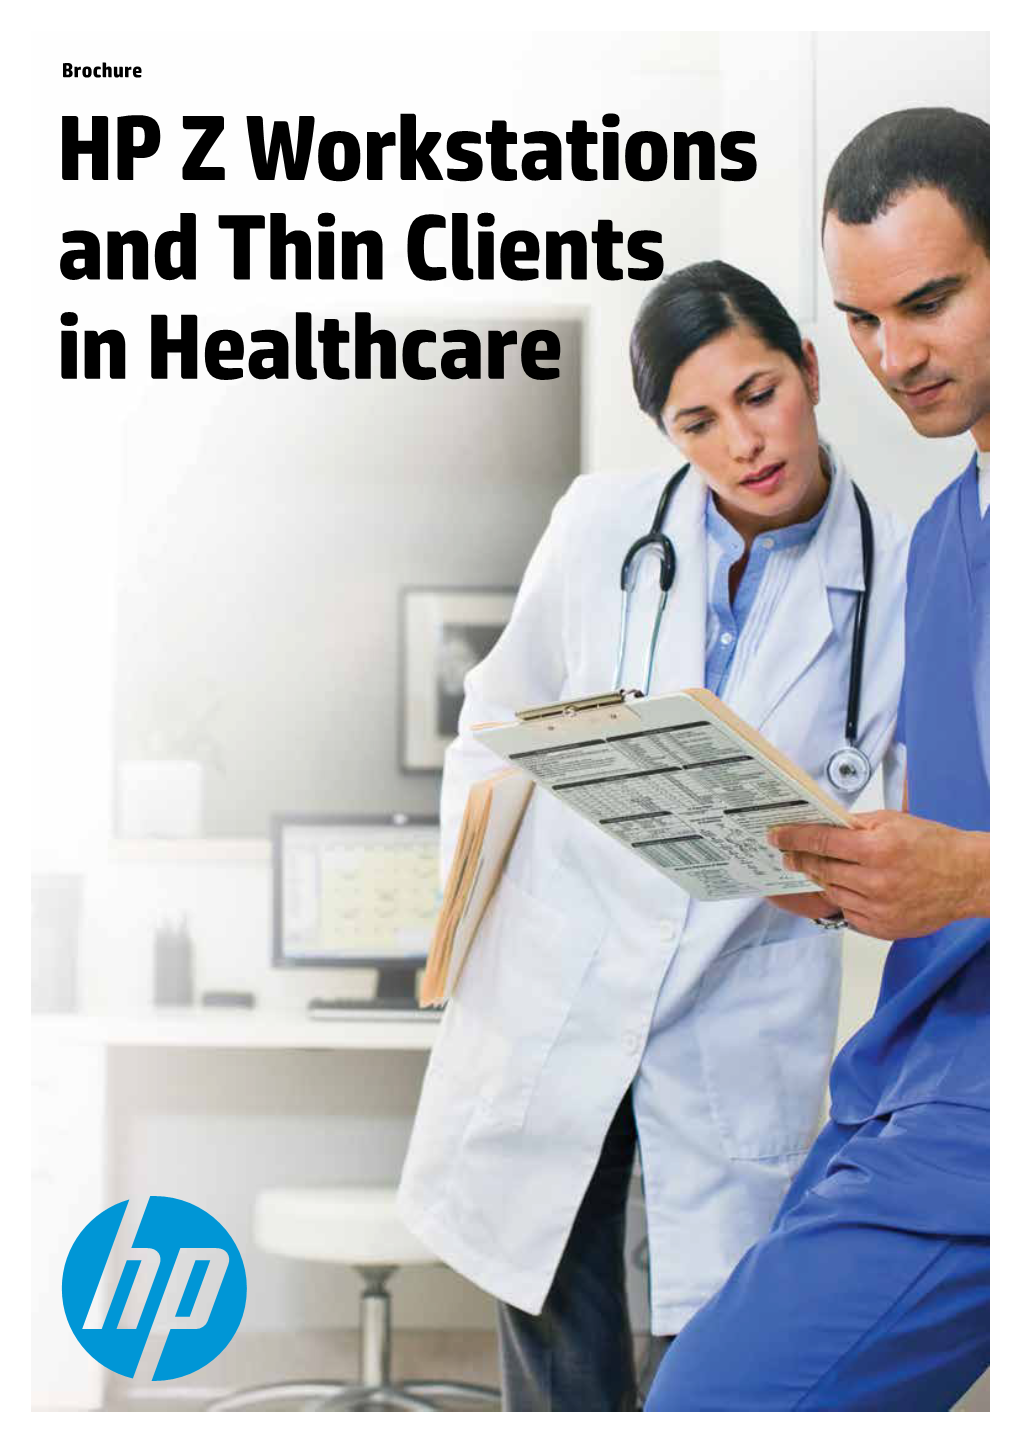 HP Z Workstations and Thin Clients in Healthcare Brochure | HP Z Workstations and Thin Clients in Healthcare